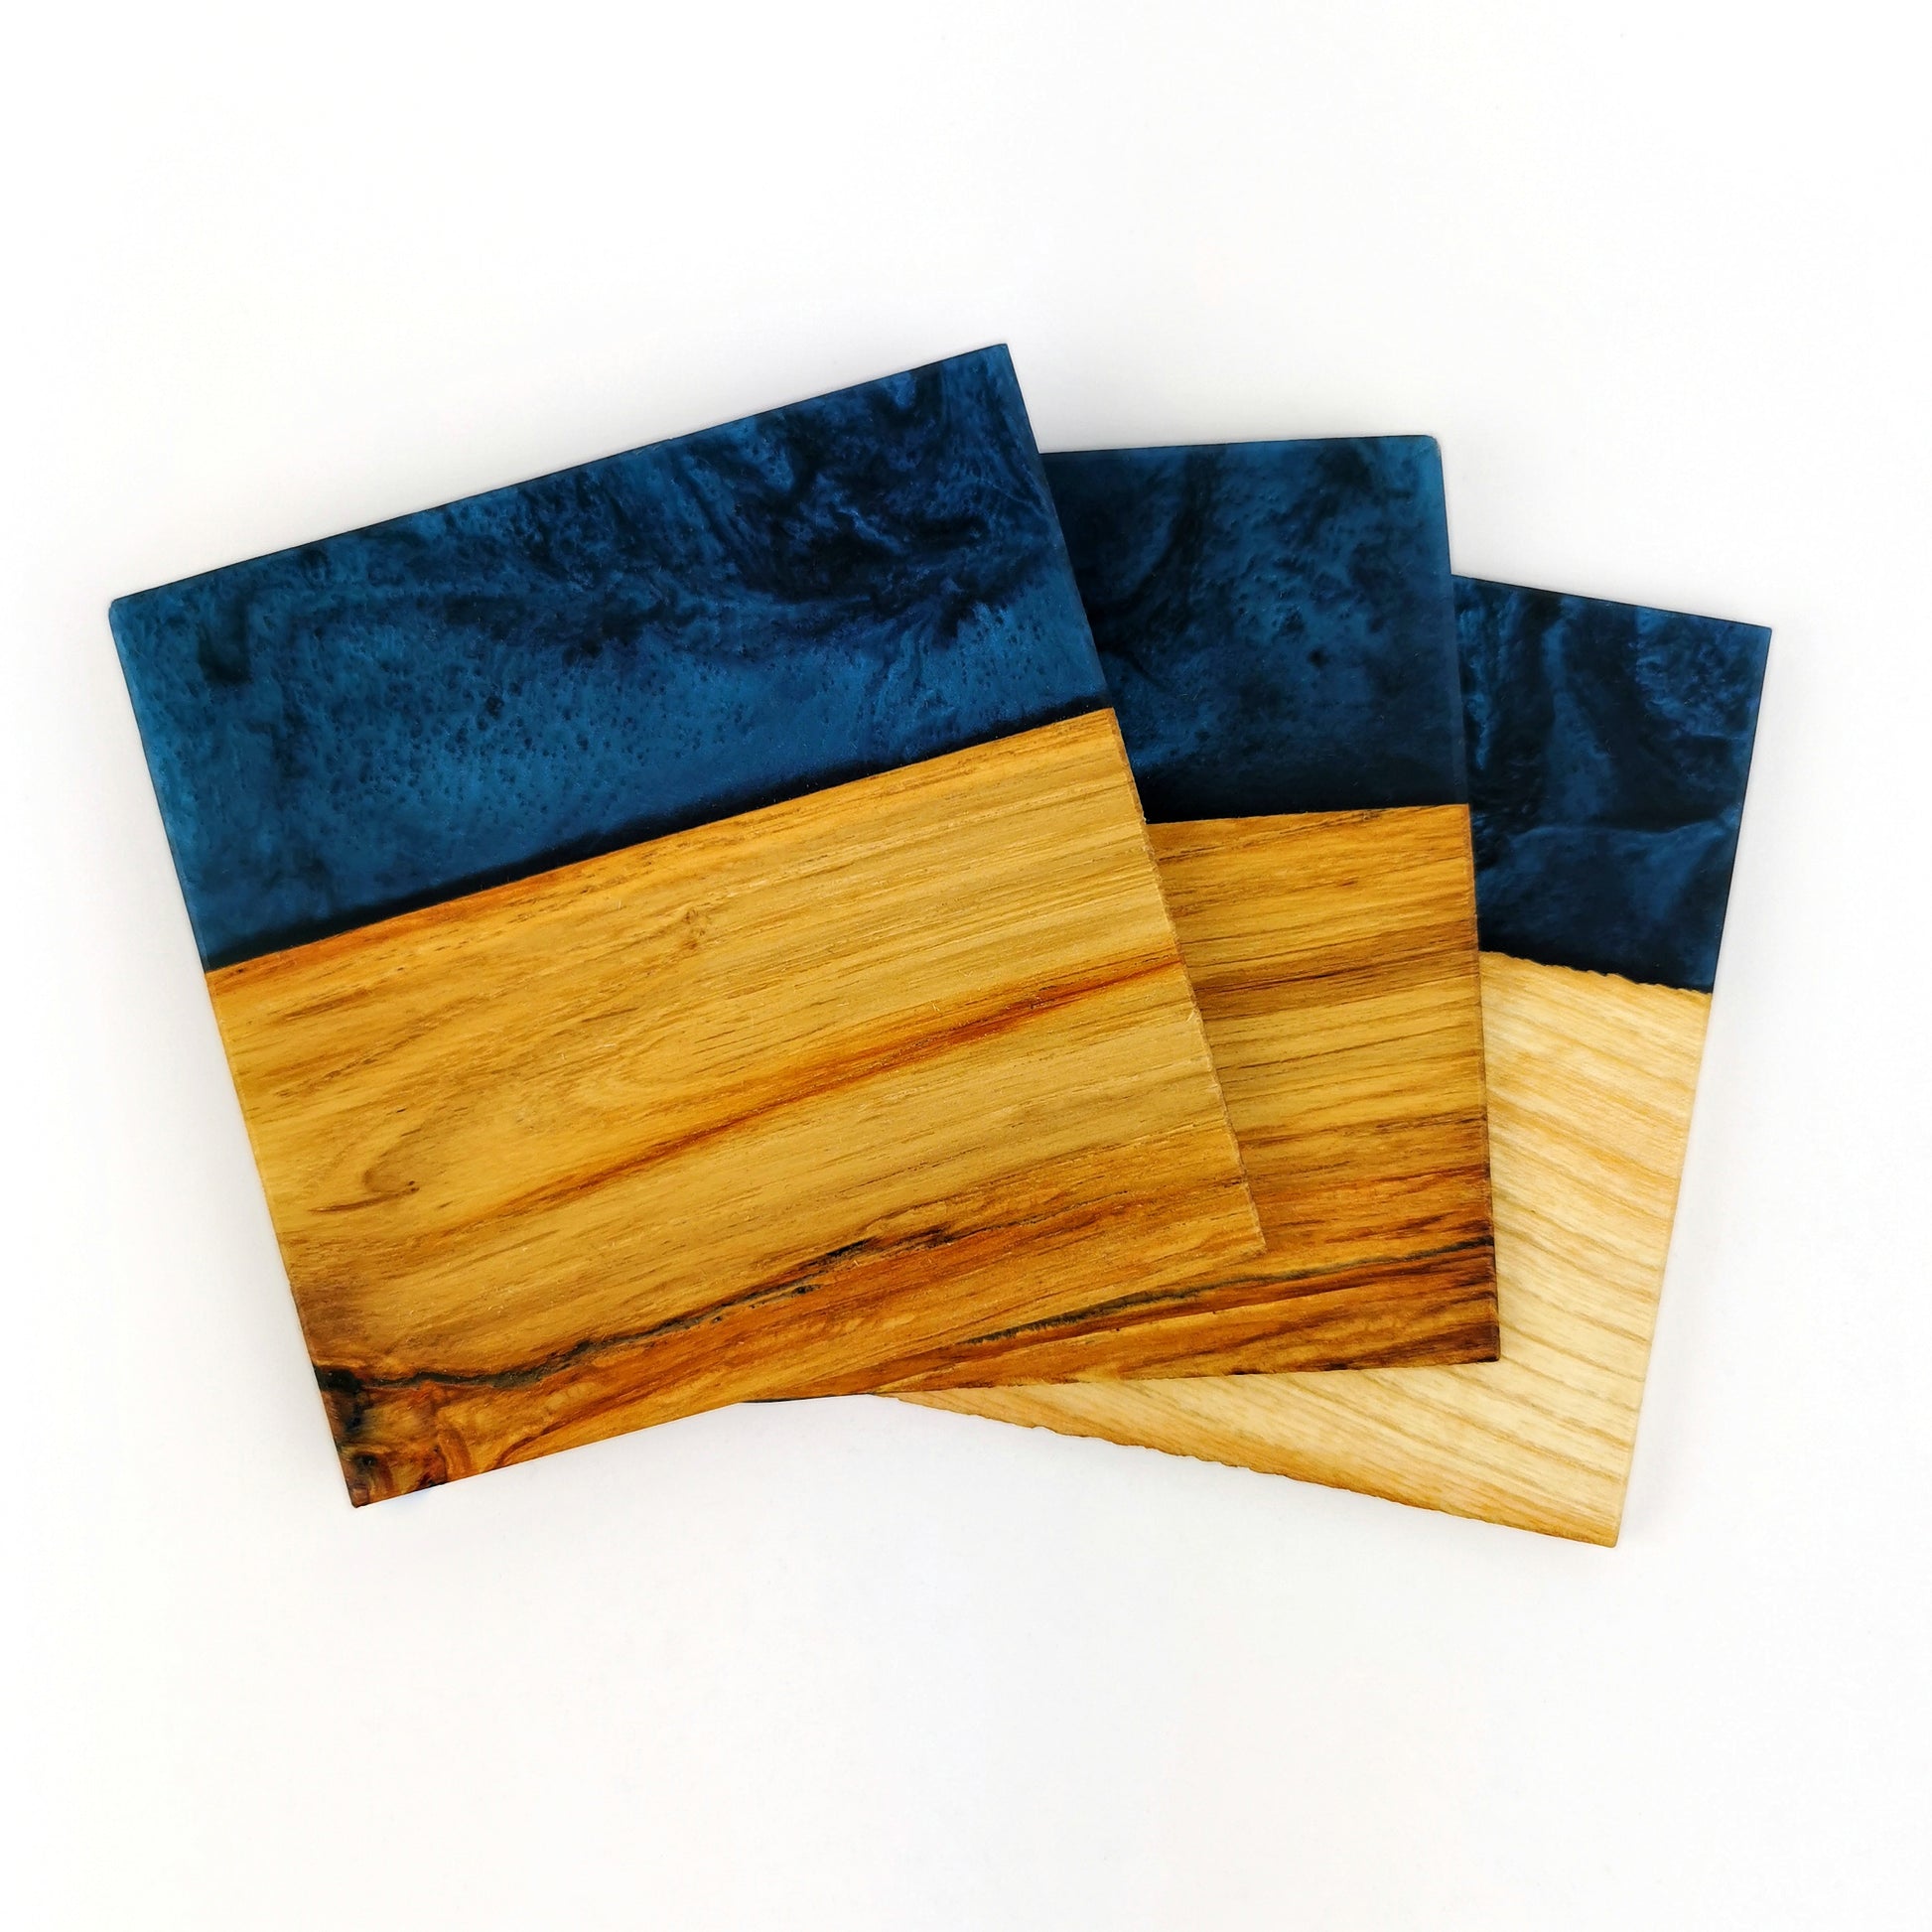 Wooden Epoxy Resin Drink Coasters - Ceramic Connoisseur